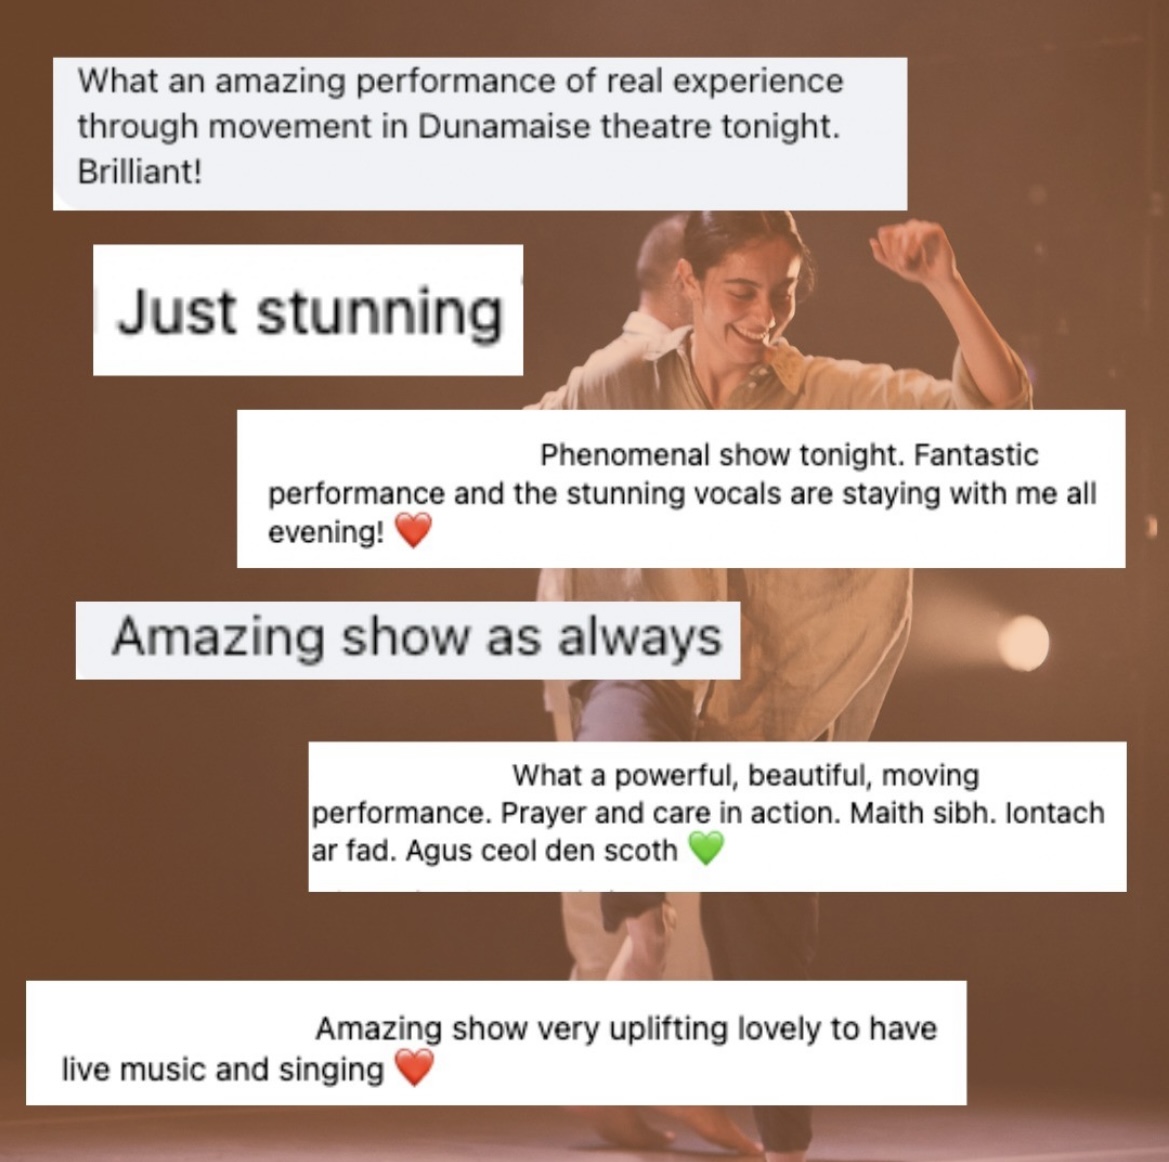 Audiences around the country have been raving about A Call to You! Make sure to get your tickets now for Thursday 11th May 🤩 🎟 bit.ly/3KQpIof #ACallToYou #Dance #LimeTreeTheatre #Limerick